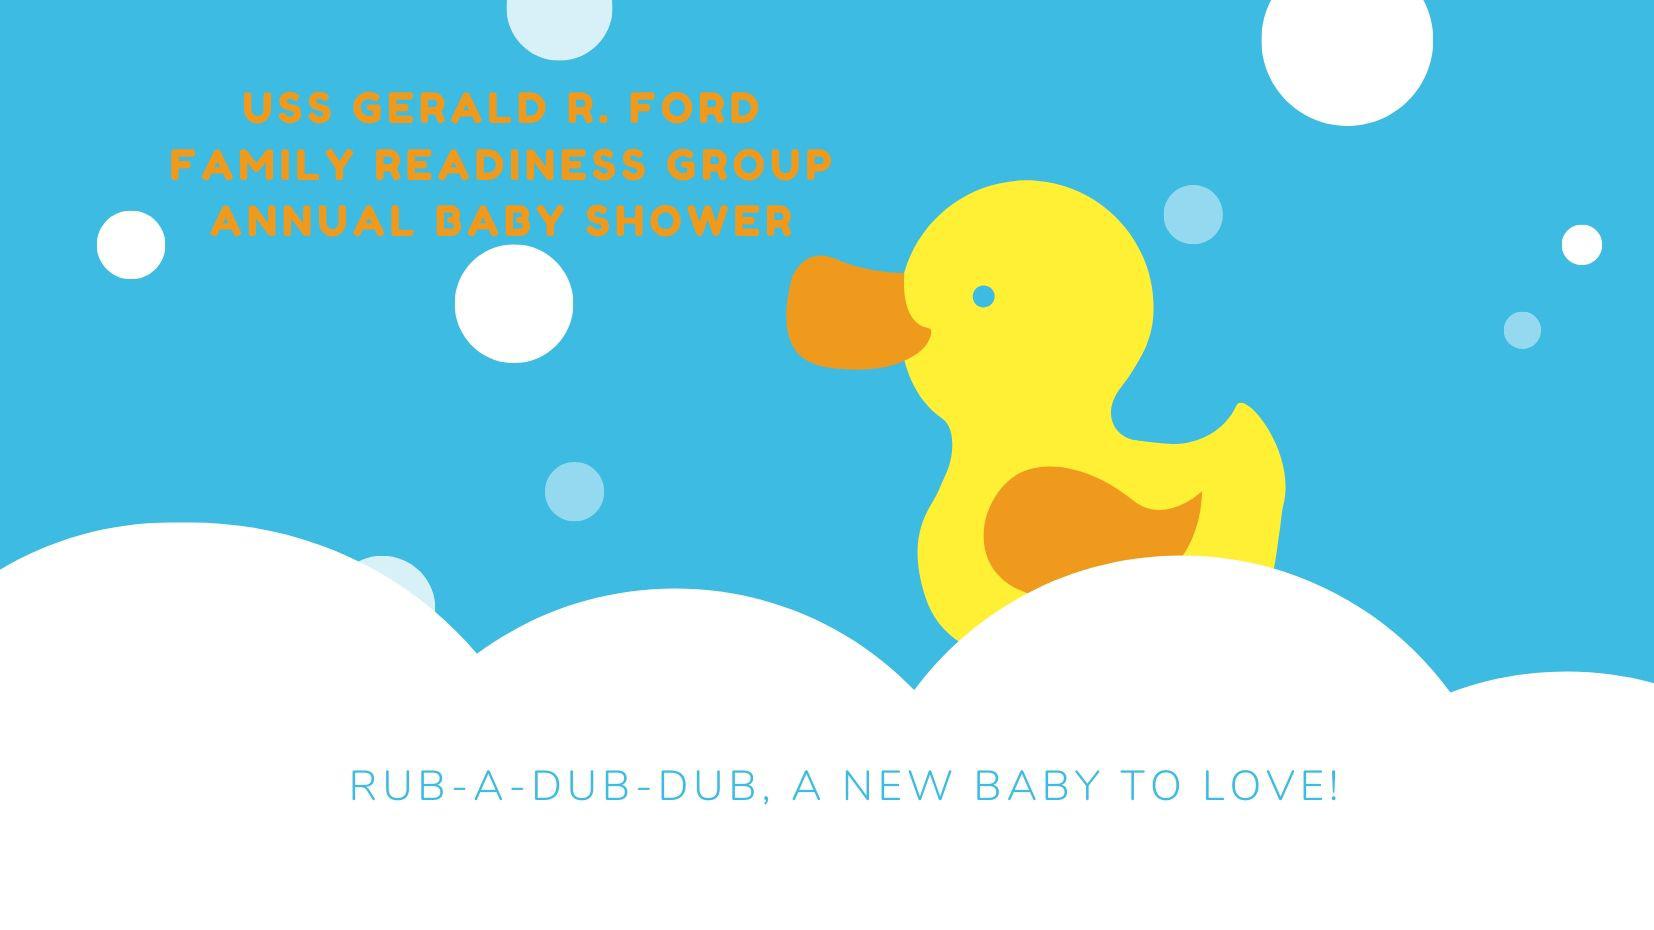 USS Gerald R. Ford Family Readiness Group Annual Baby Shower